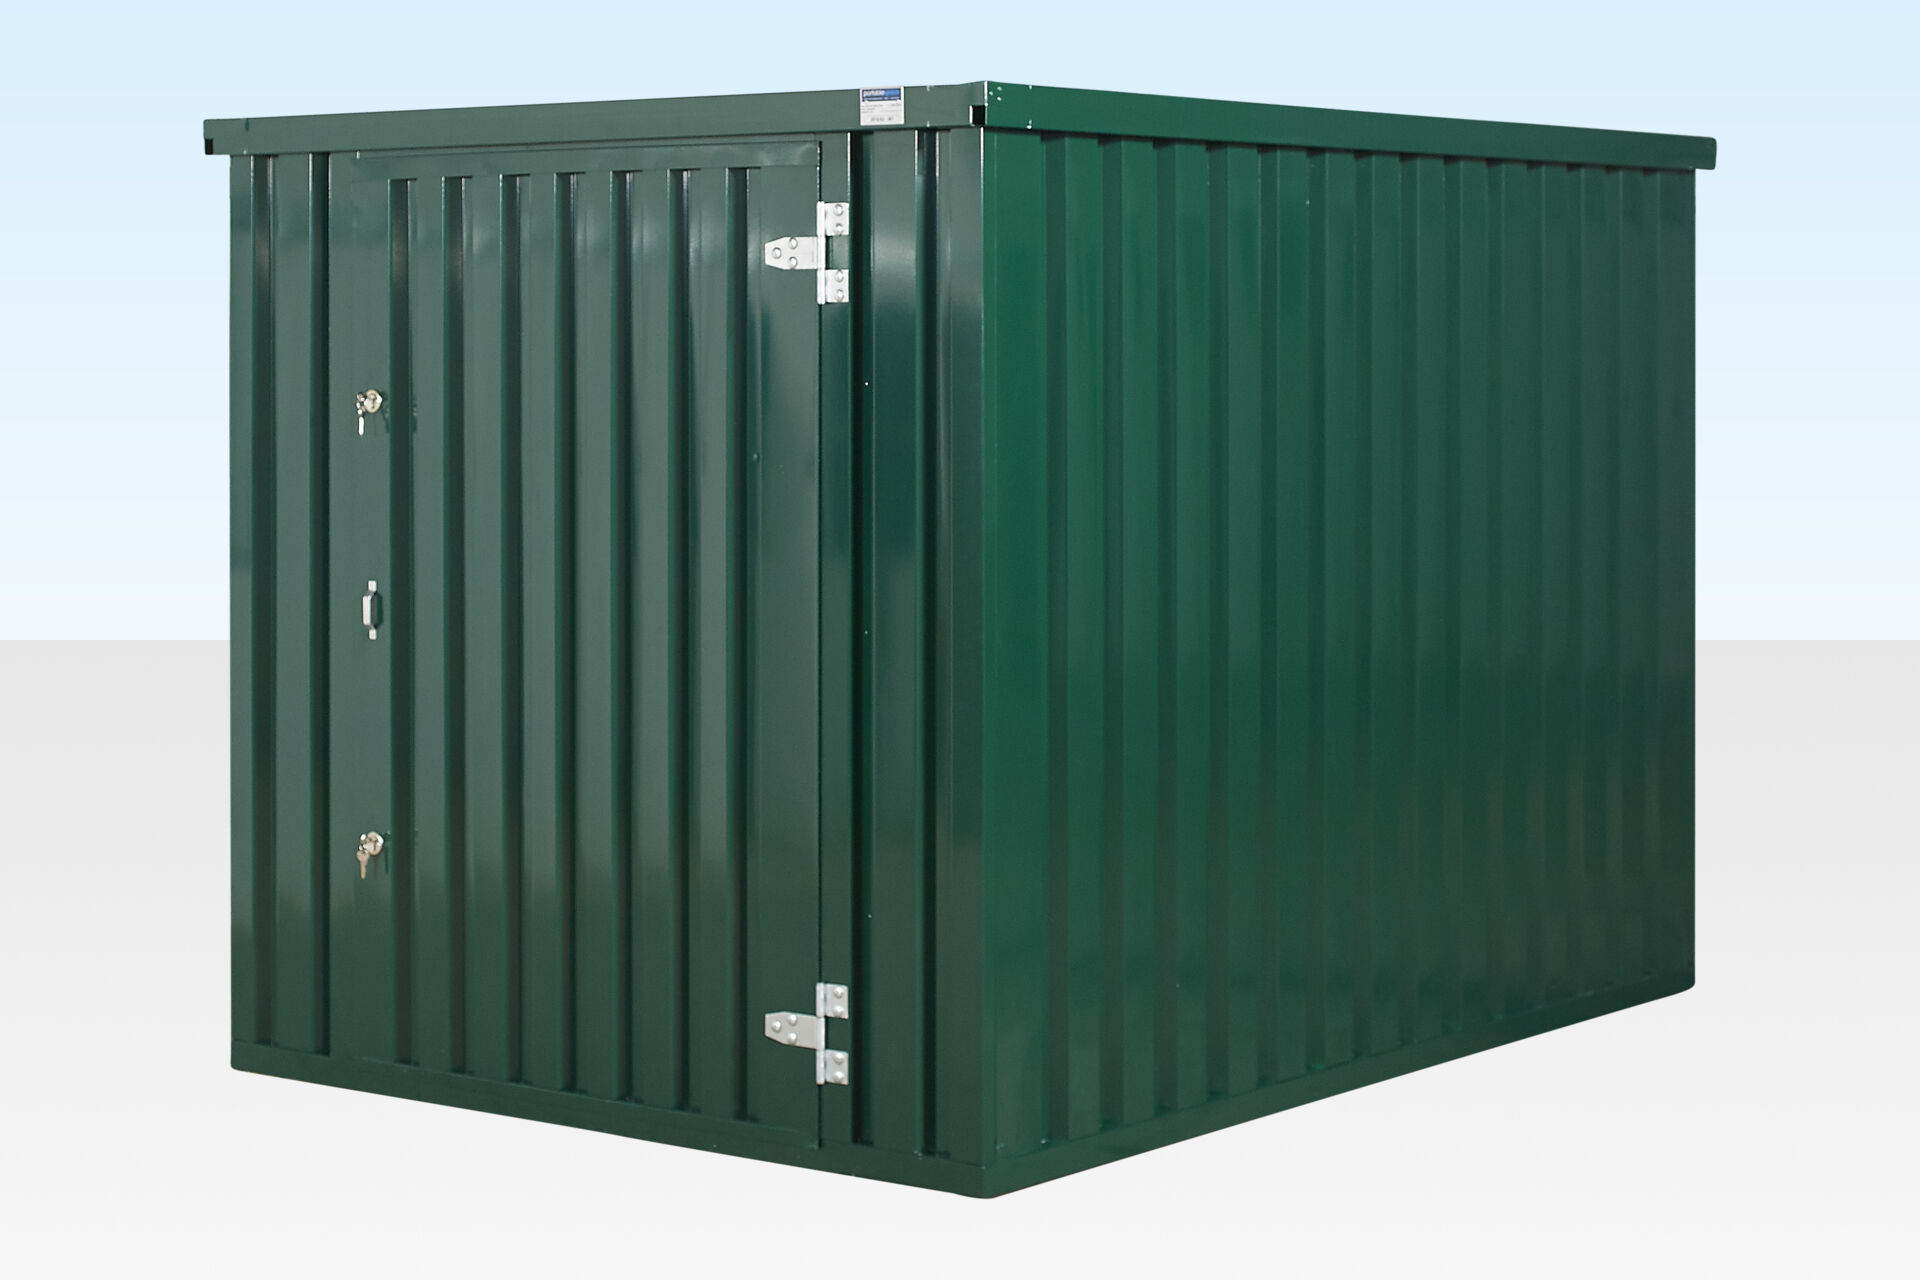 BUY FLAT PACKED STORAGE CONTAINER 3M X 2.1M AT WWW.HELLOCONTAINERS.COM